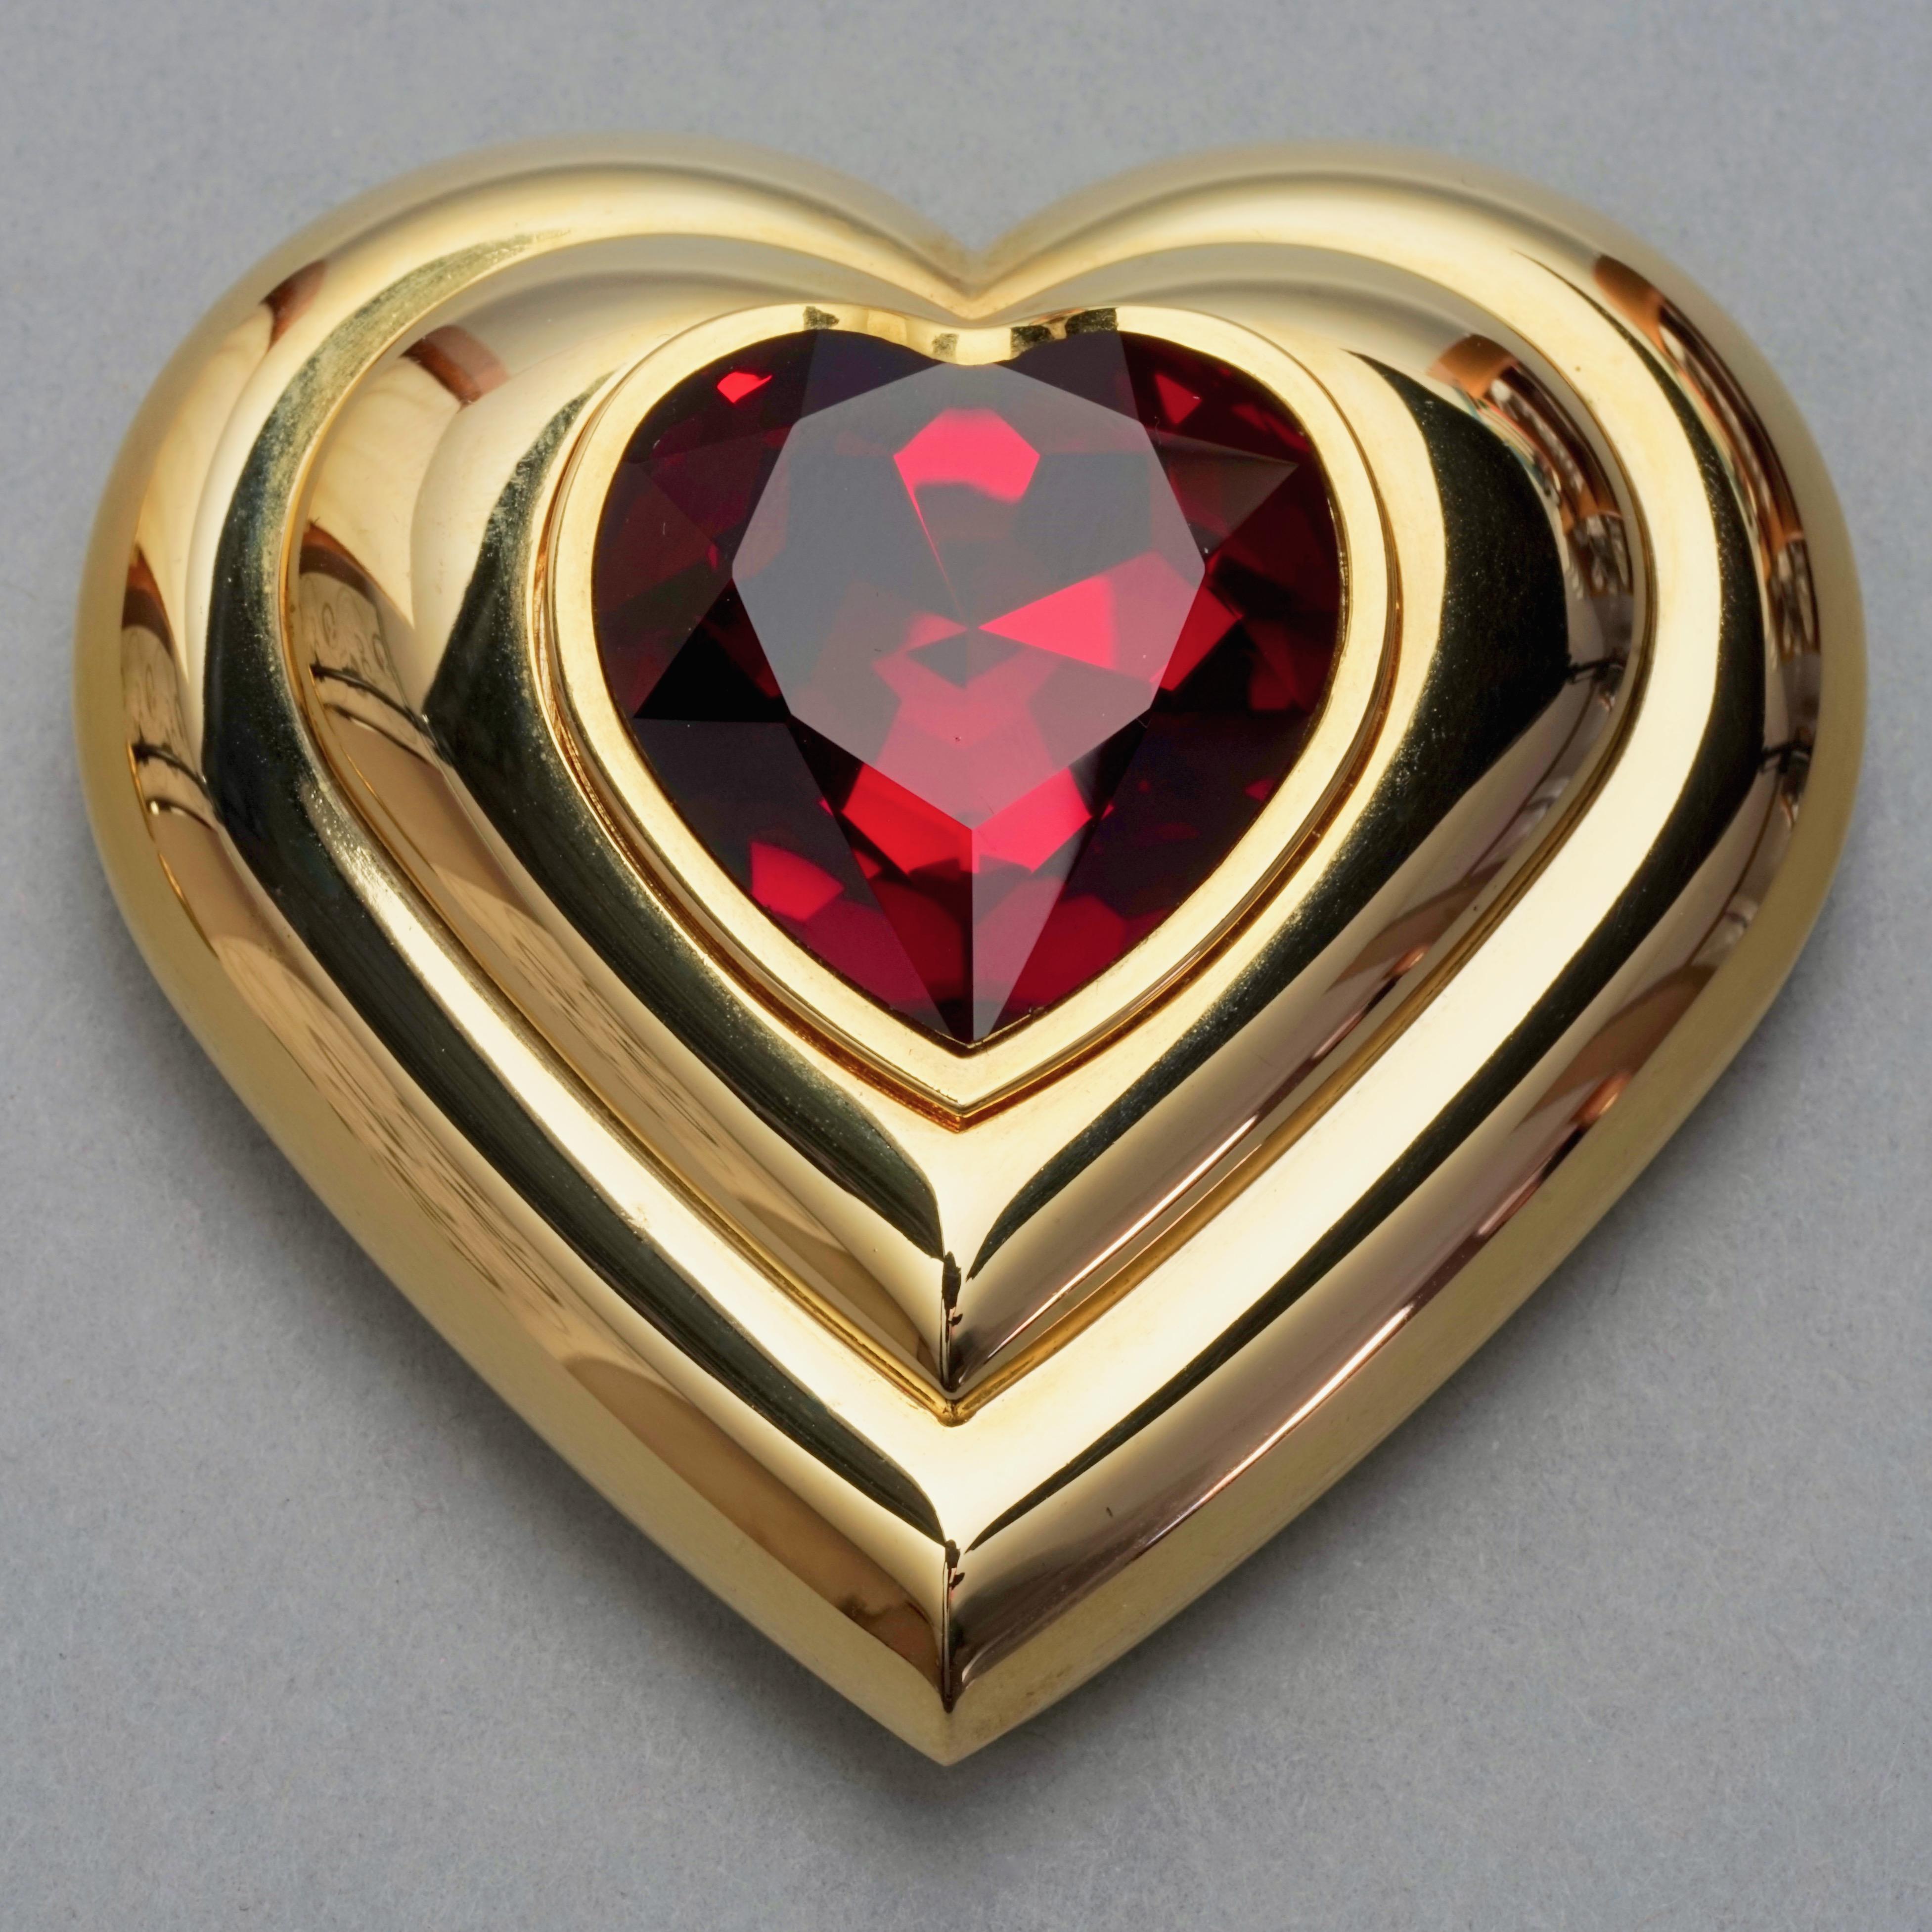 Vintage YVES SAINT LAURENT by Robert Goossens Red Heart Jewelled Compact Powder

Measurements:
Height: 2.63 inches (6.7 cm)
Width: 2.63 inches (6.7 cm)

Features:
- 100% Authentic YVES SAINT LAURENT by Robert Goossens.
- Heart red rhinestone